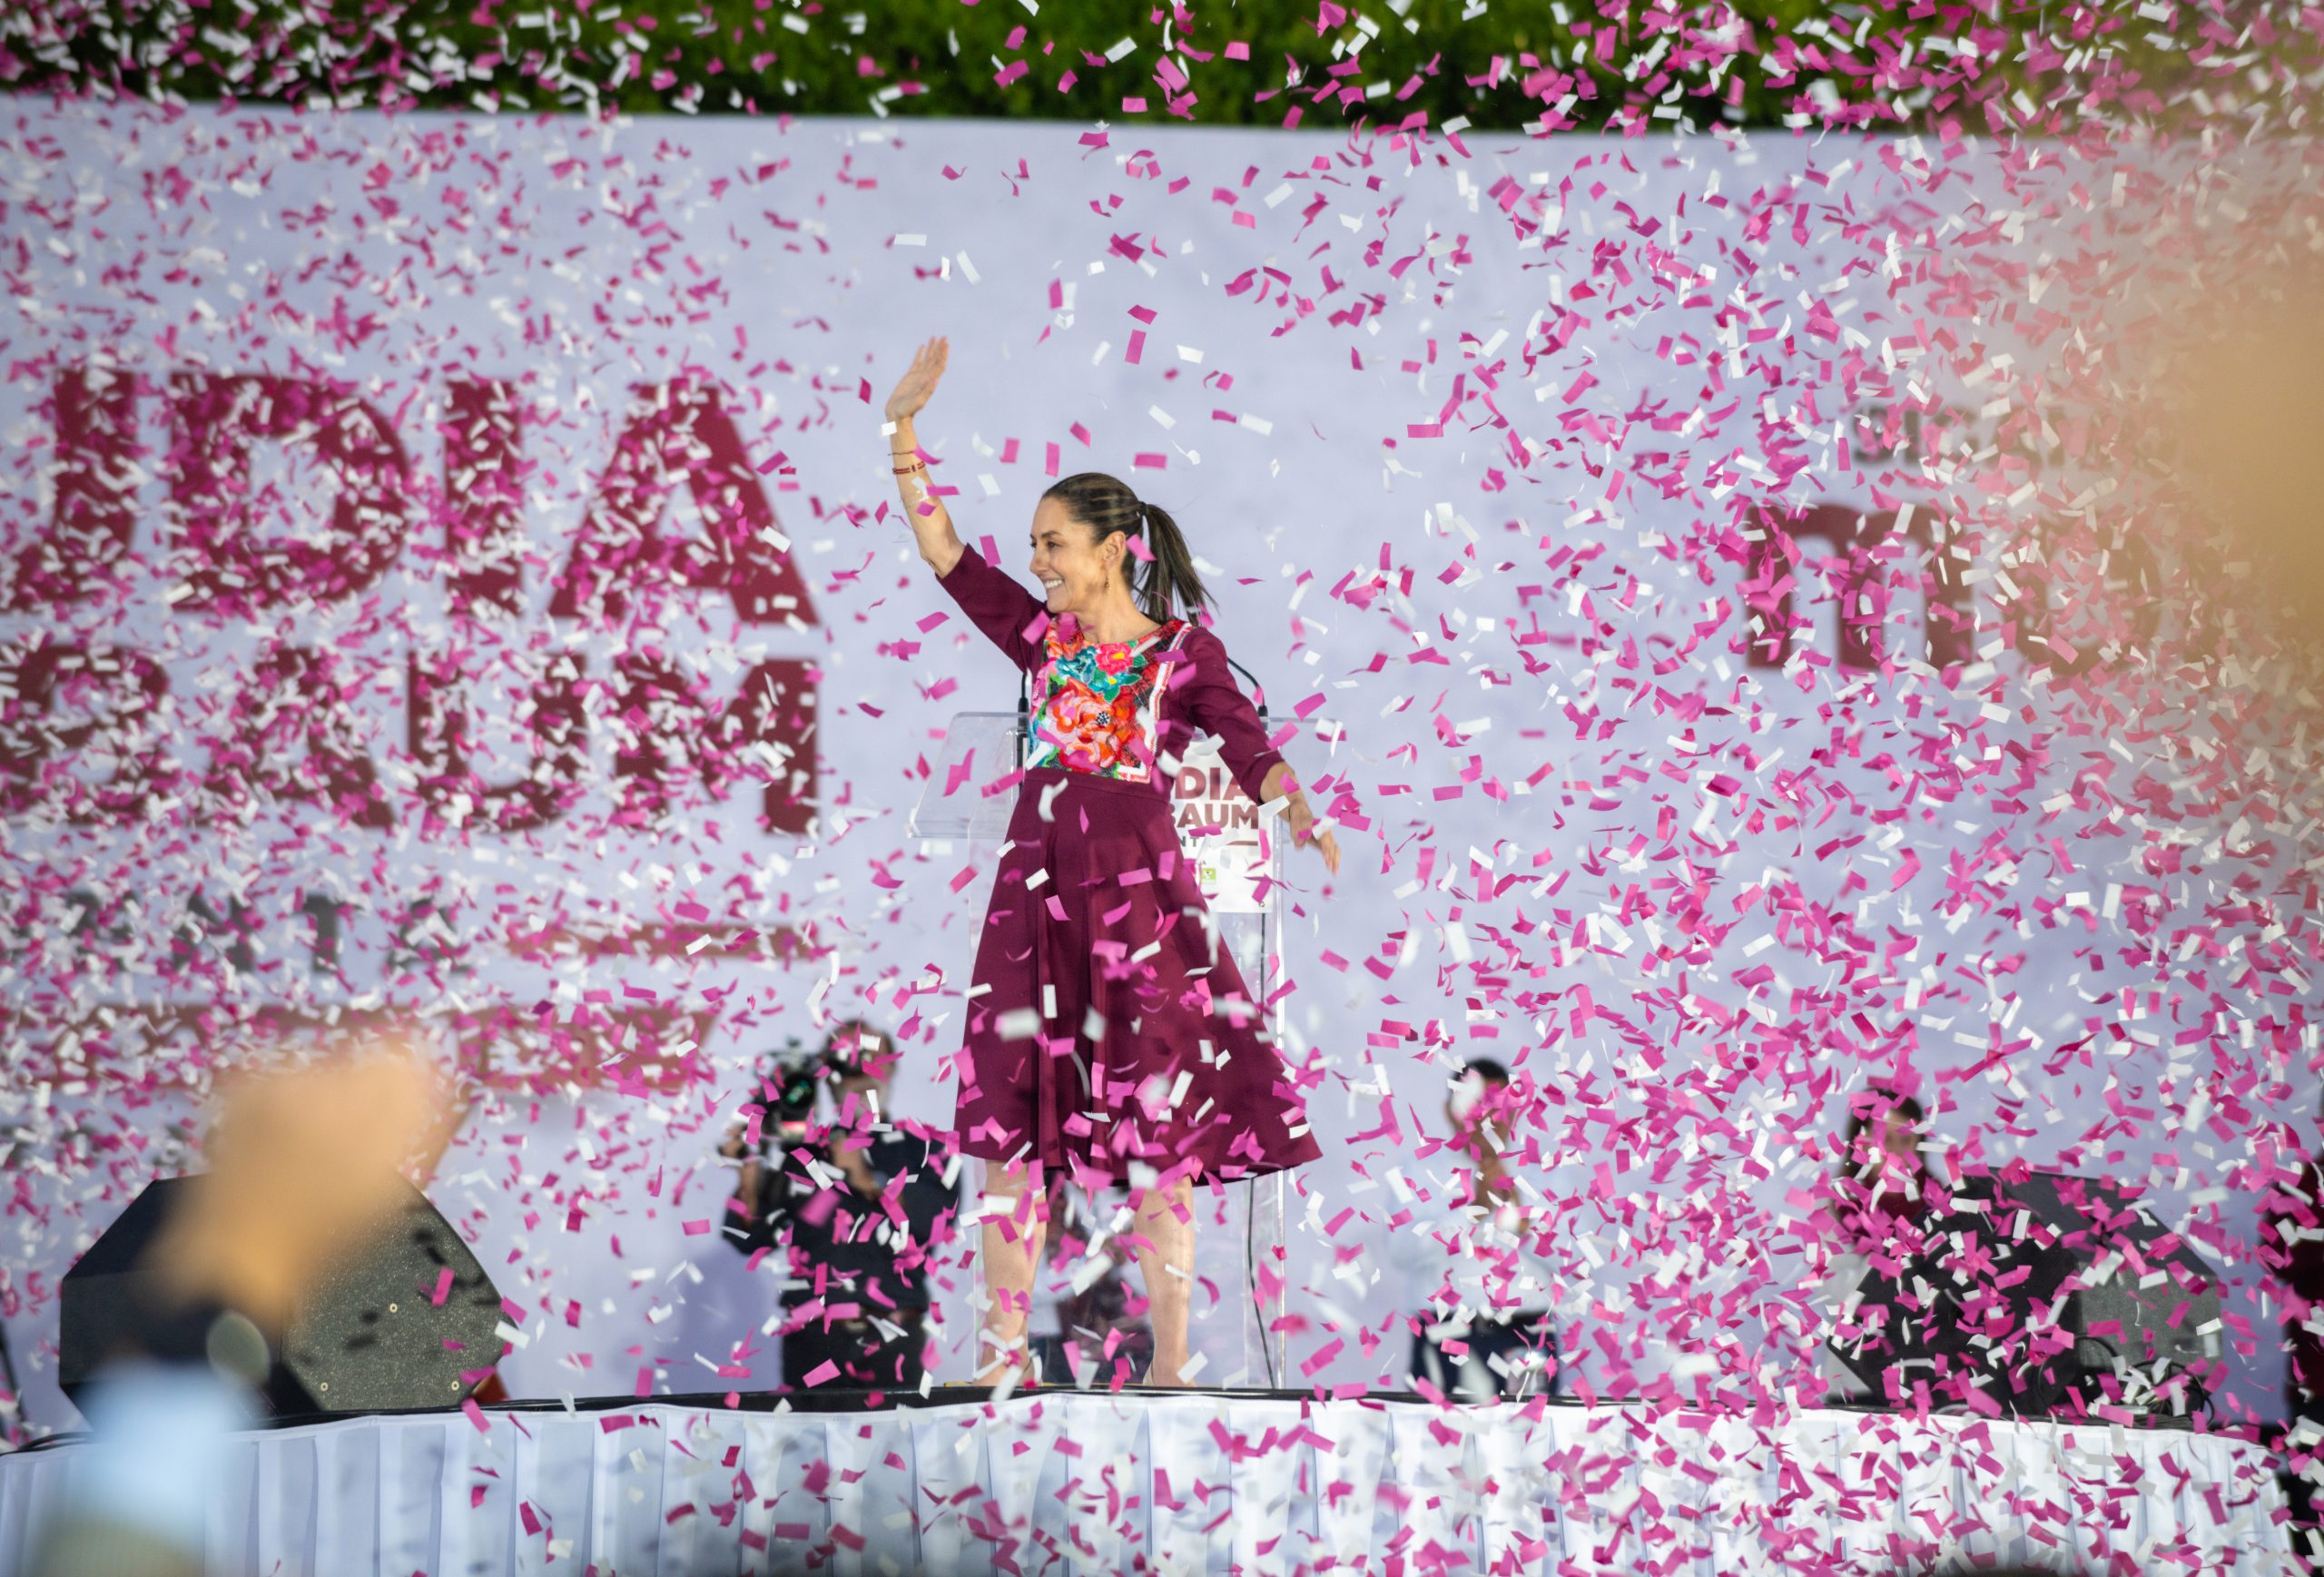 Historic Election: Mexico’s New Female President will Face Old Politics